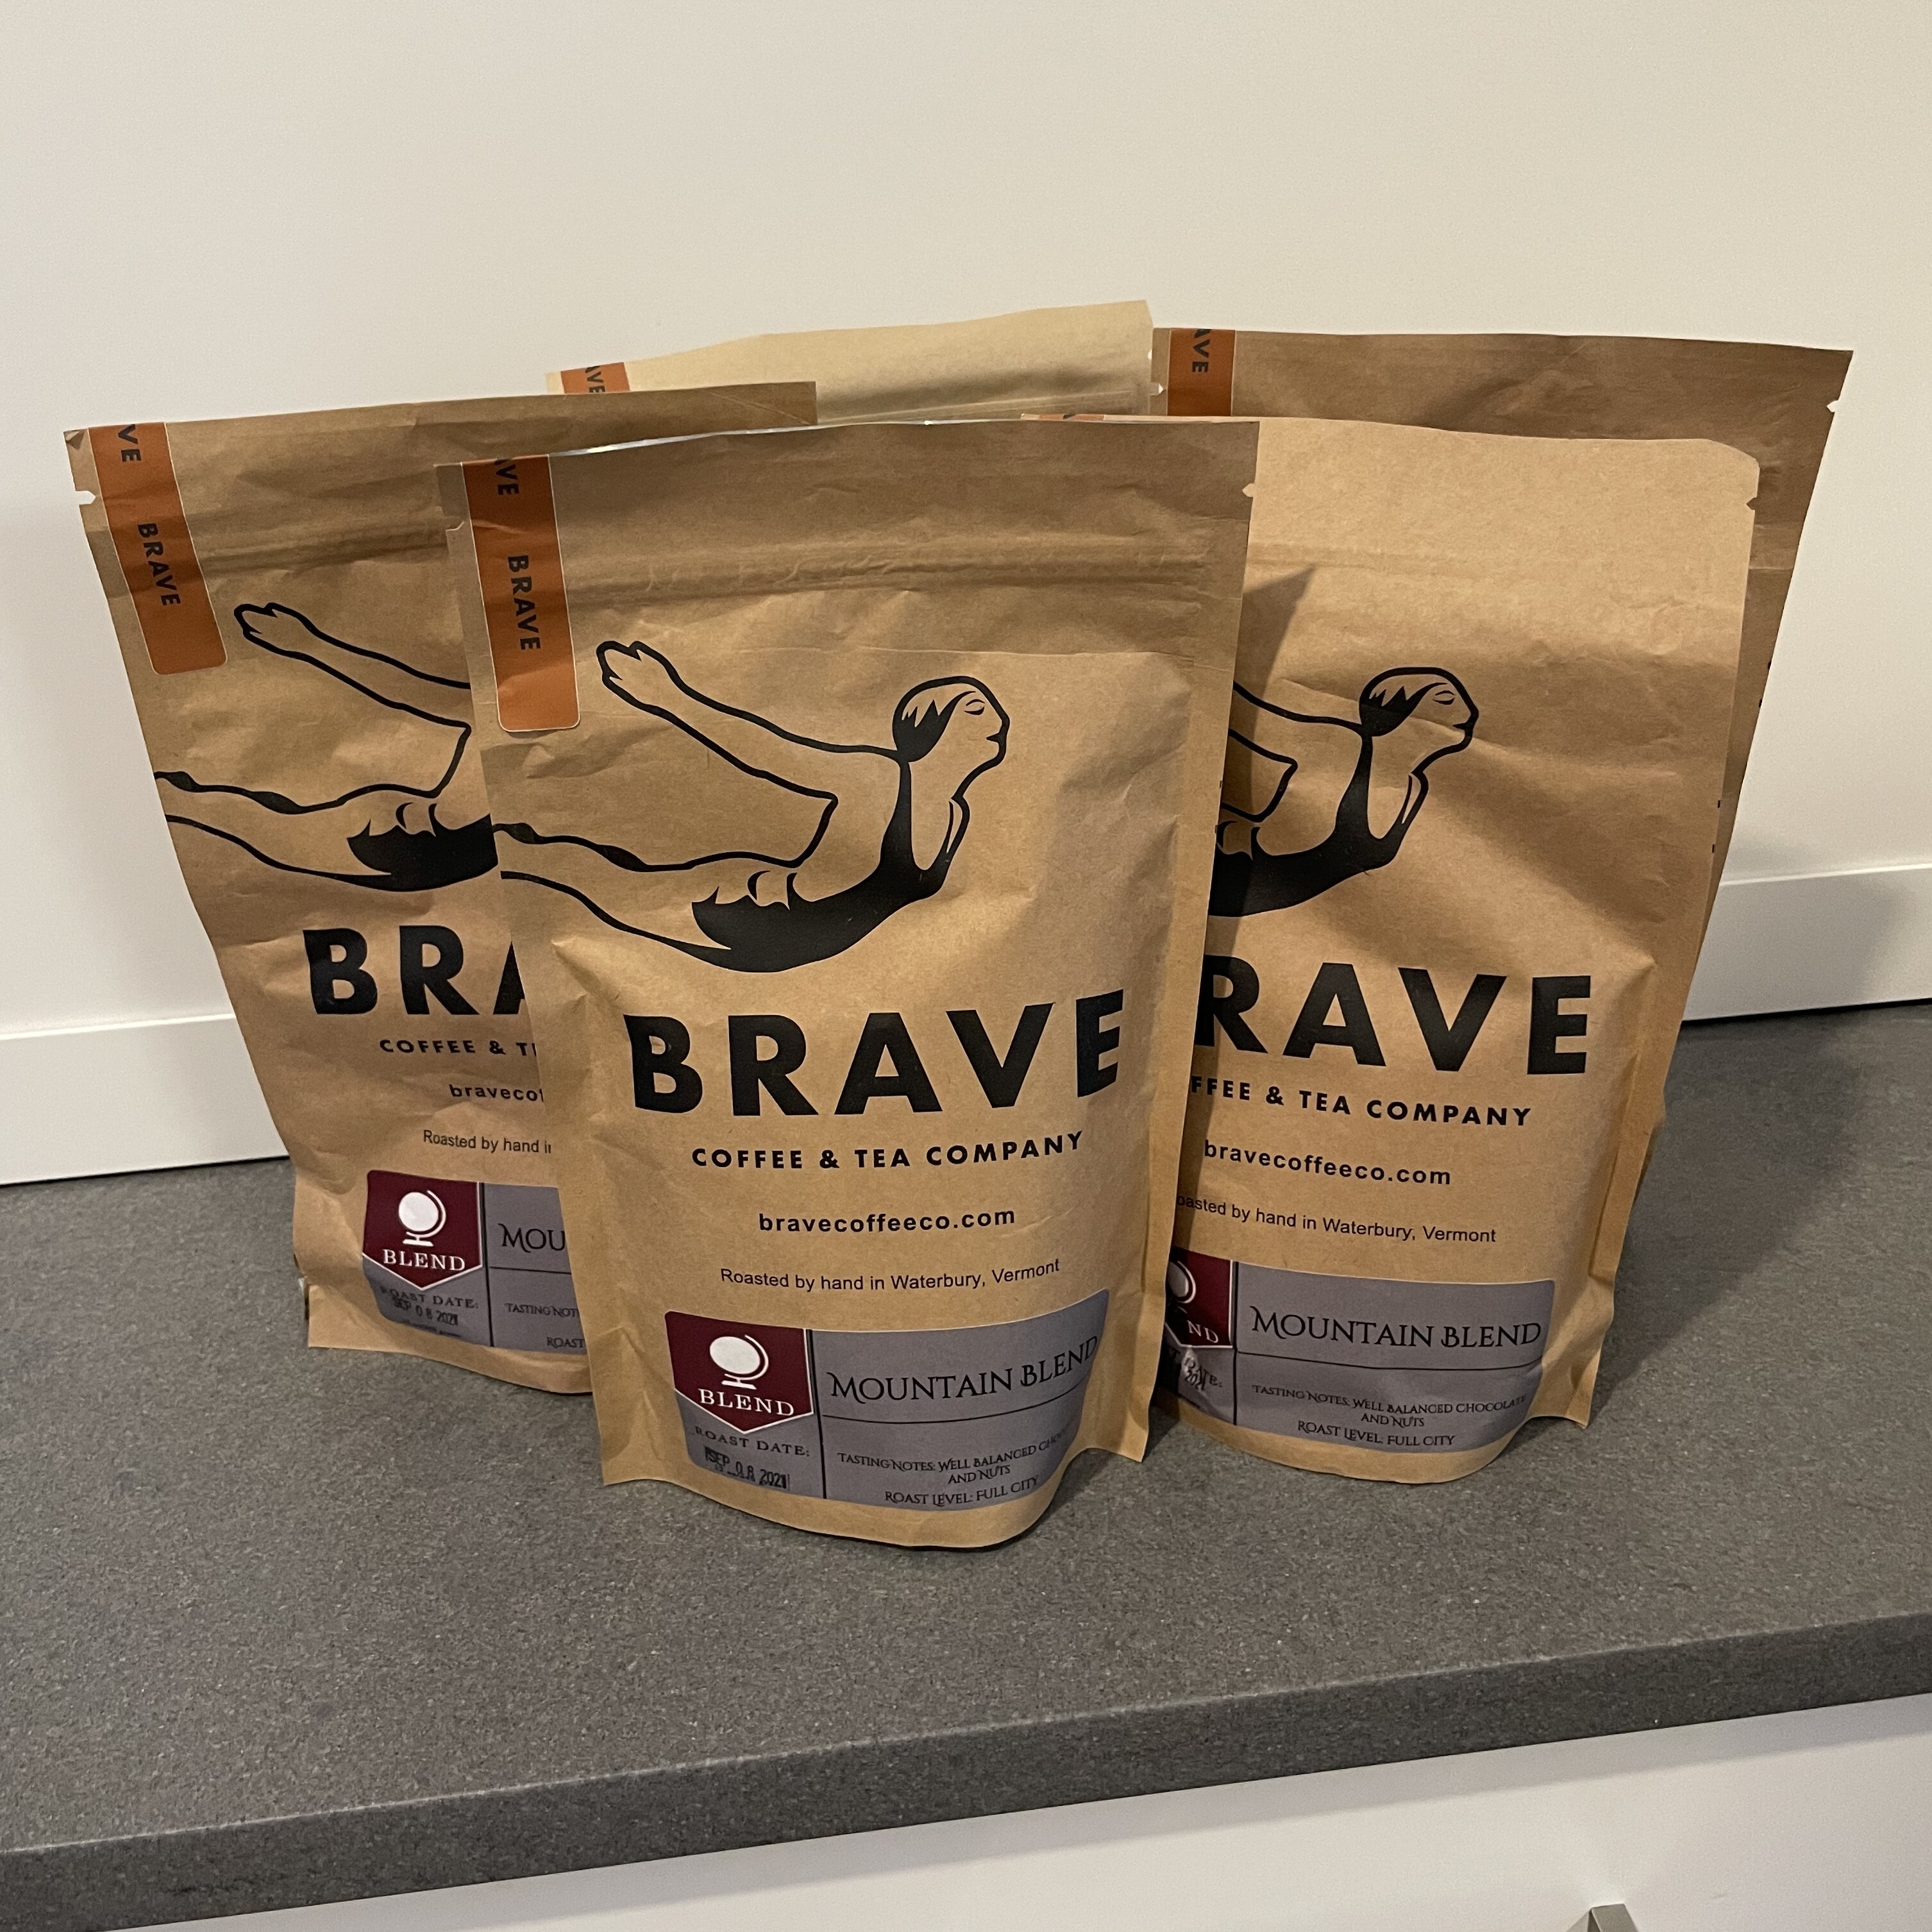 Product Labels for Brave Coffee